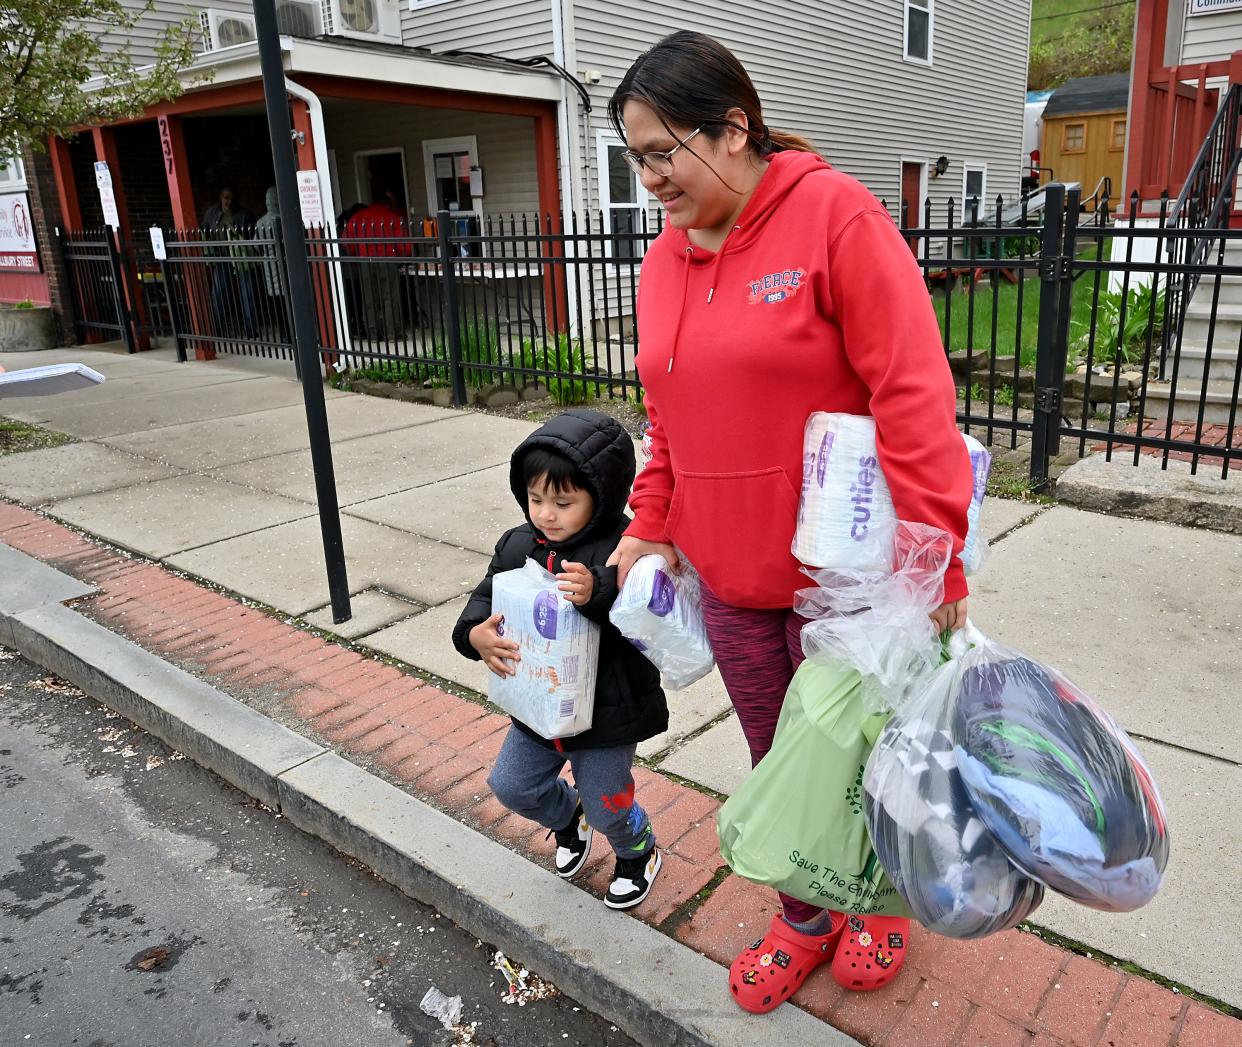 Maria Chuqui and her son, Andrew, 3, cross Millbury Street after getting bags of food, clothes and diapers at Pernet Family Health Service.